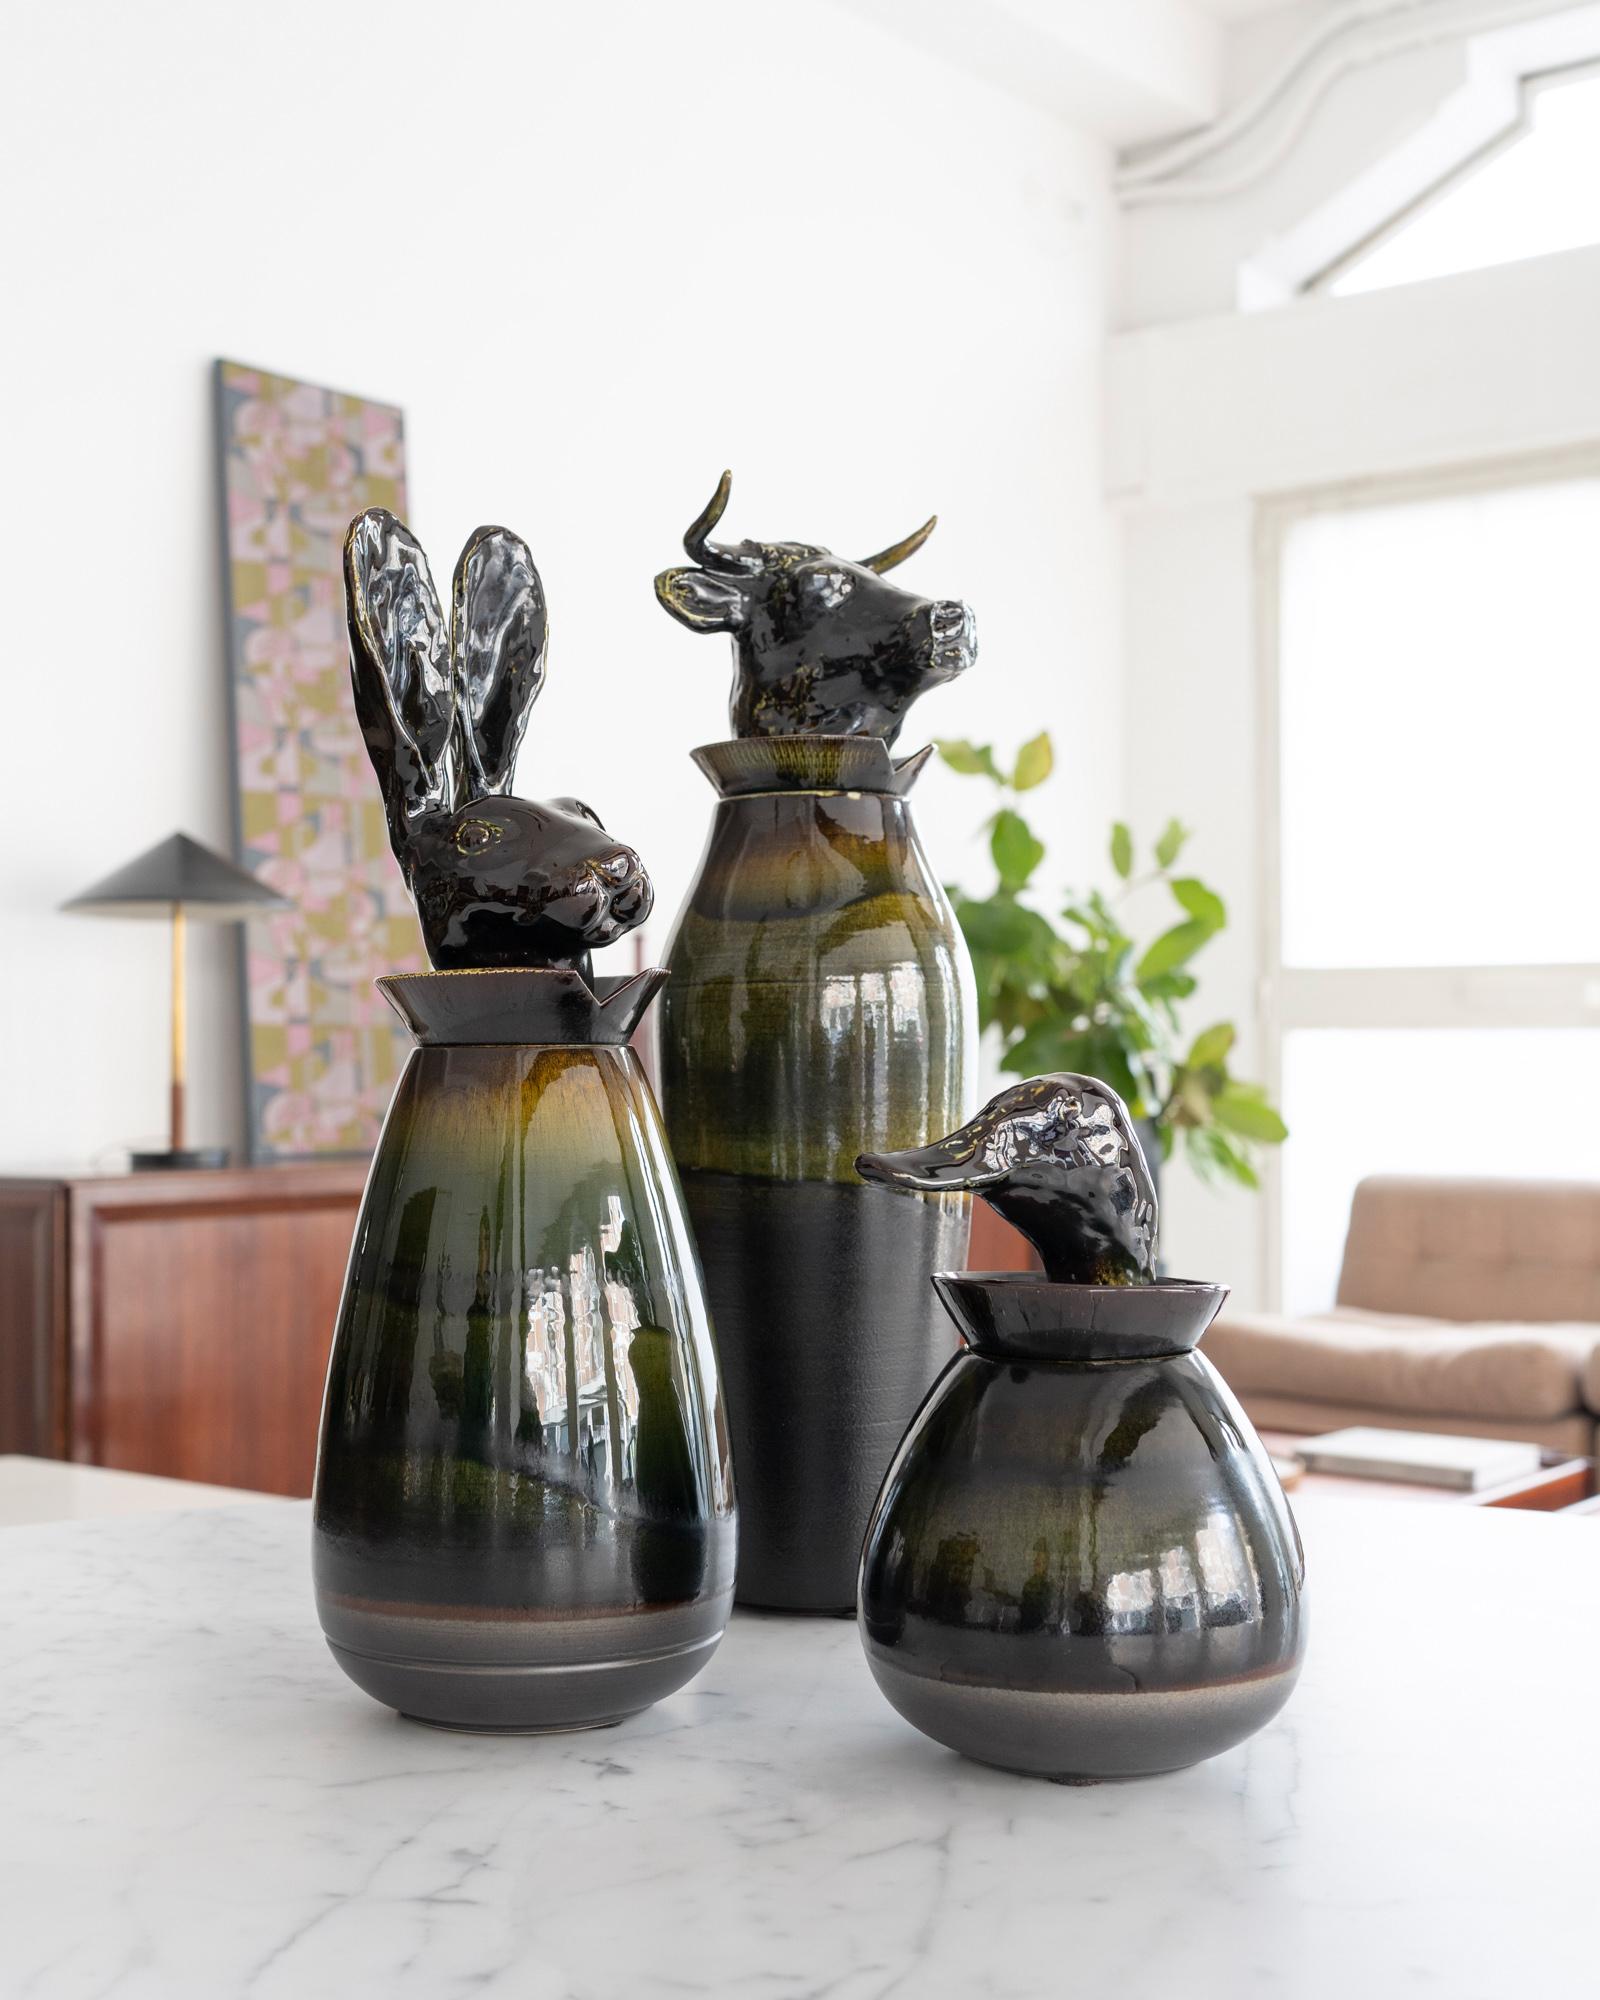 Hand-Painted Italian Contemporary Artistic Ceramic Canopo Rabbit Black Green Vase by Amaaro For Sale